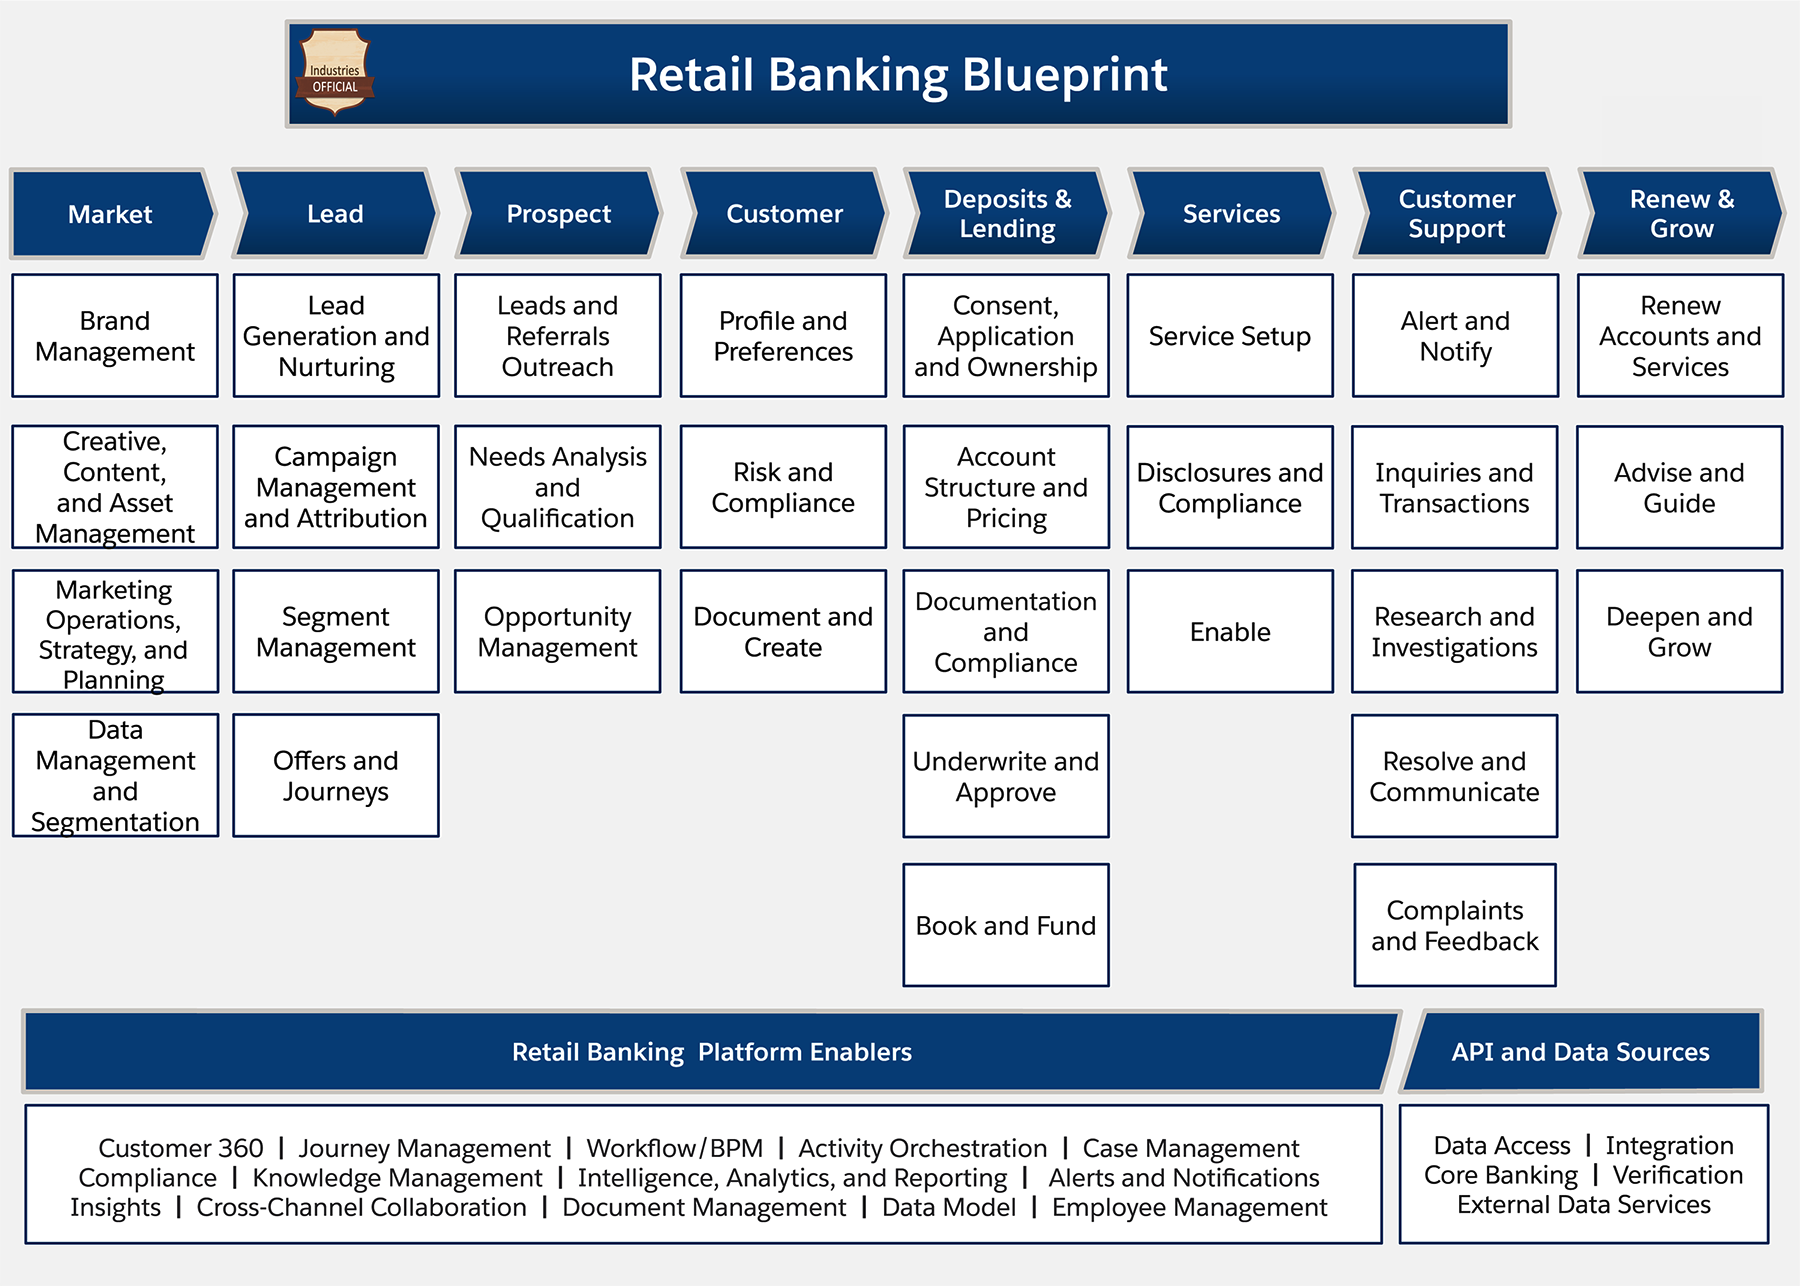 Retail Banking Industry Blueprint